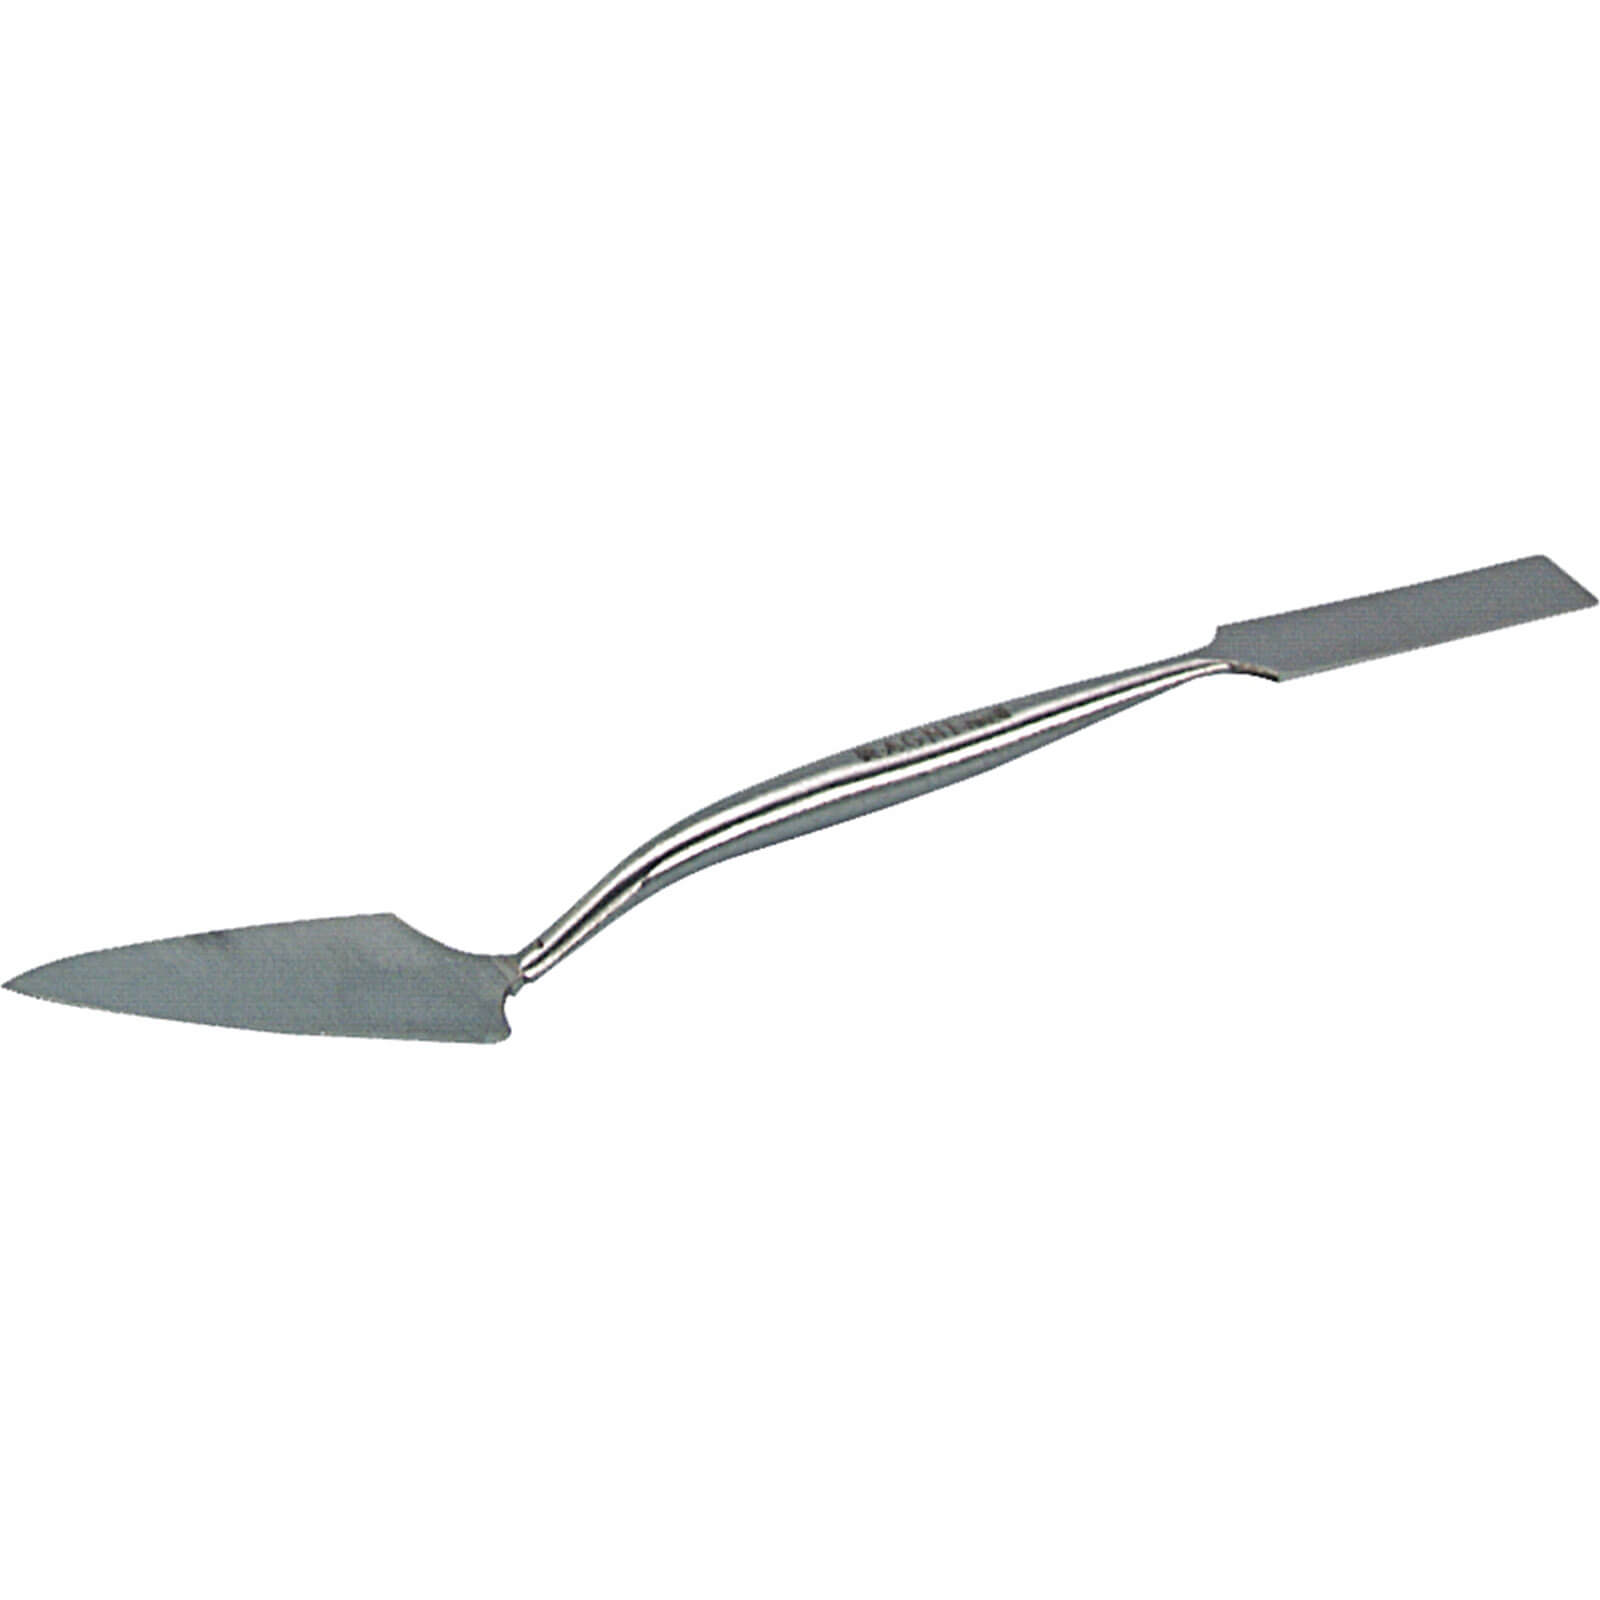 Image of Ragni Trowel and Square Small Tool 1/2" 9"